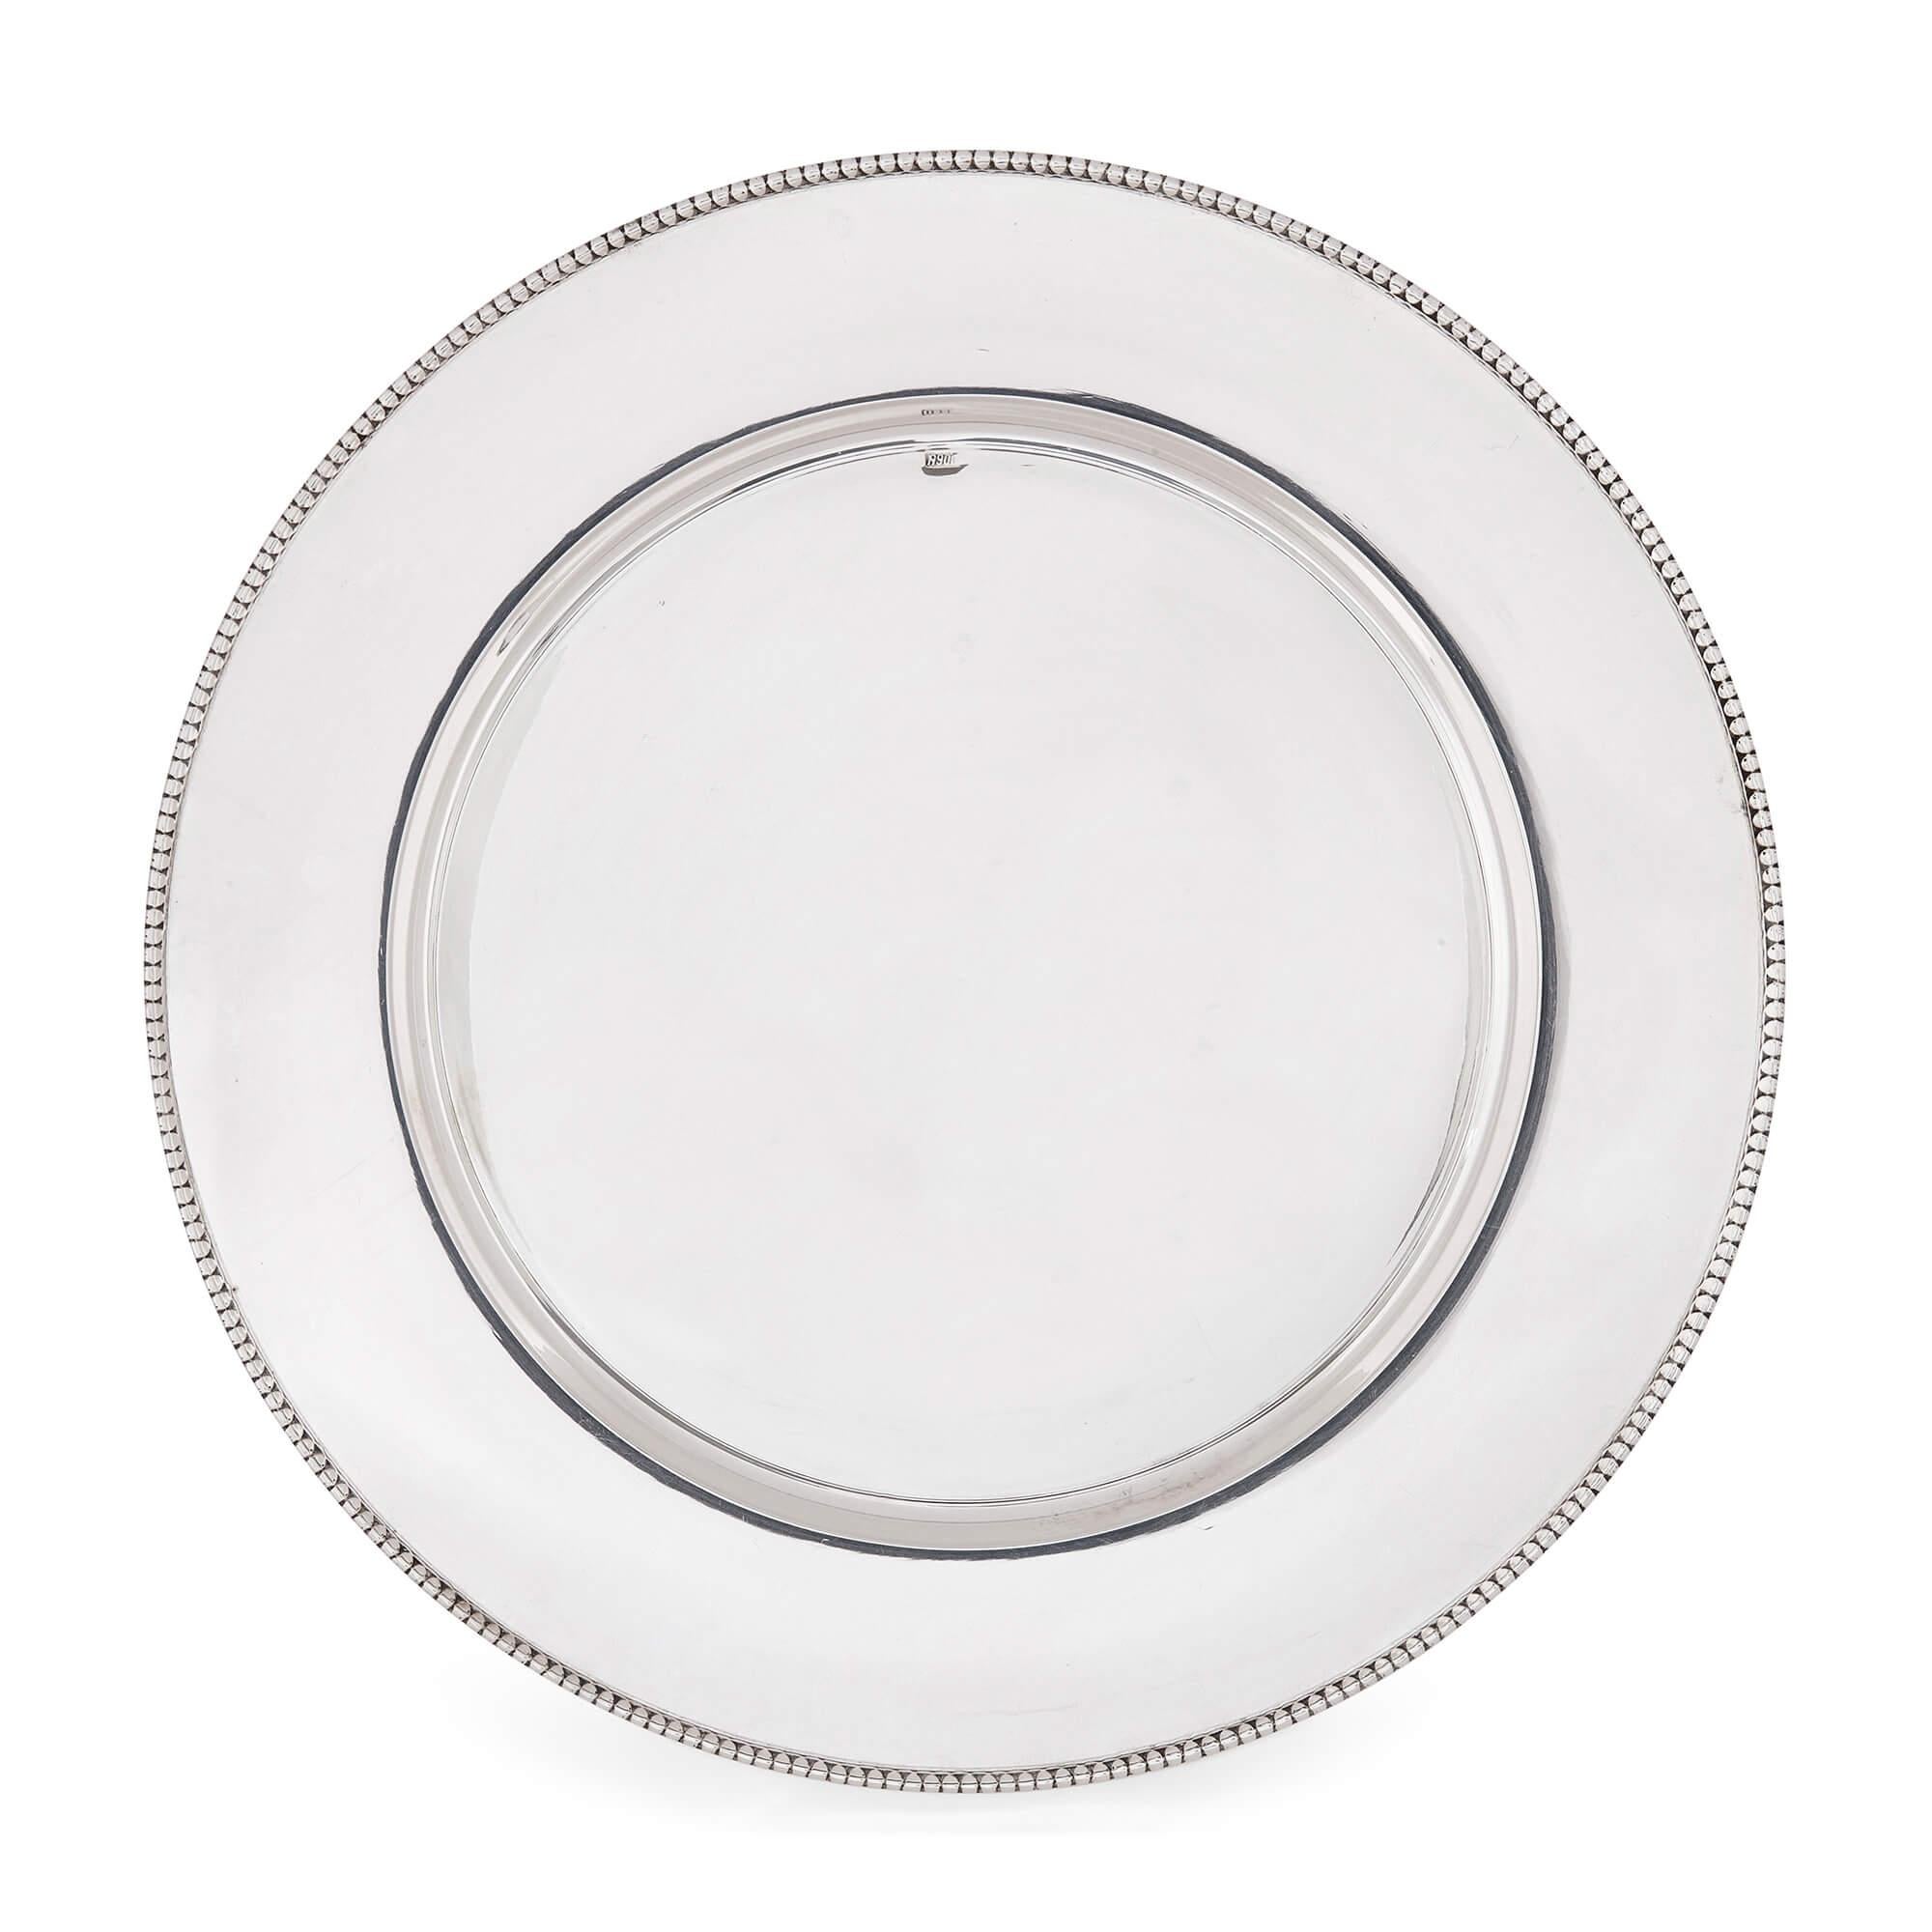 Set of 24 silver underplates 
Continental, 20th Century 
Height 1.5cm, diameter 30cm

This very refined set of twenty-four underplates (also called charger plates) was crafted in the 20th century. Entirely made from silver, this set would make a